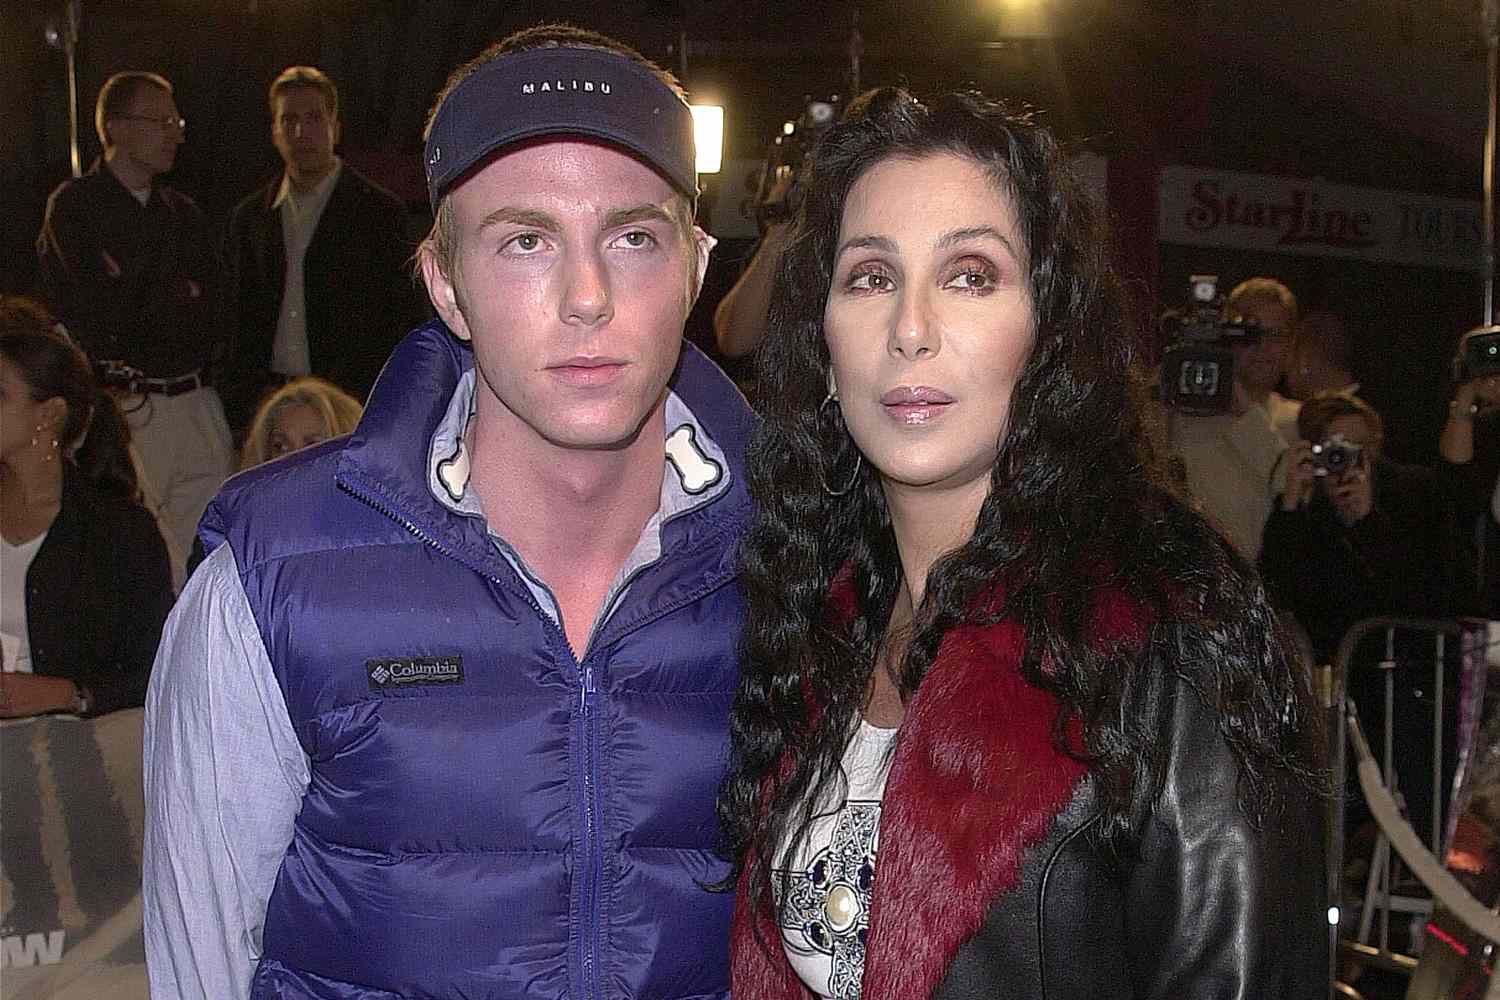 Elijah Allman’s Wife Claims Cher is ‘Manic Depressive,’ Unfit to Serve as Conservator